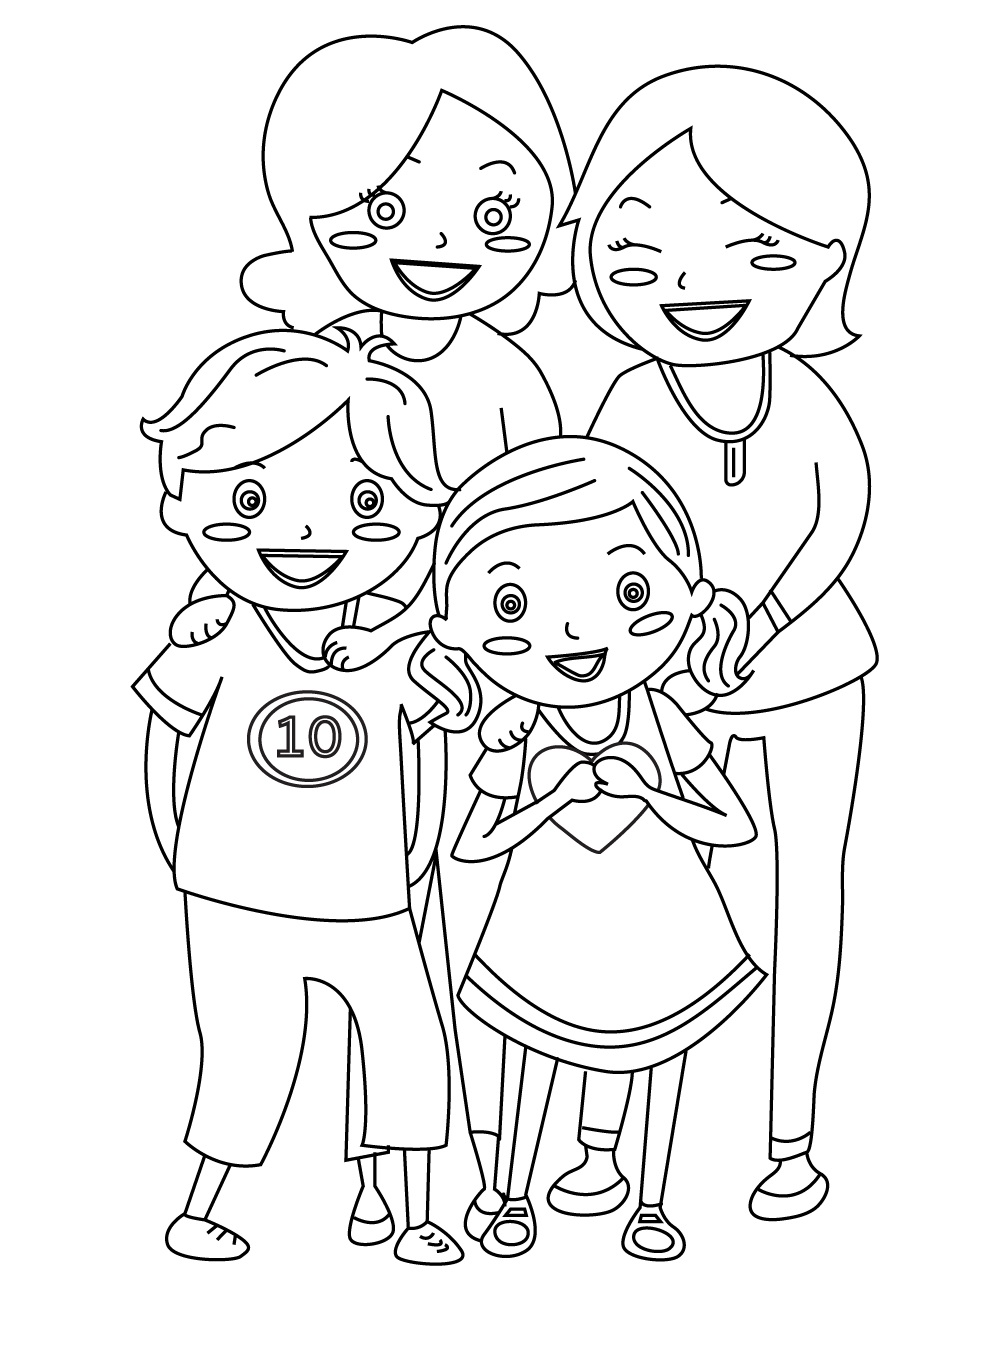 Happy family day coloring pages